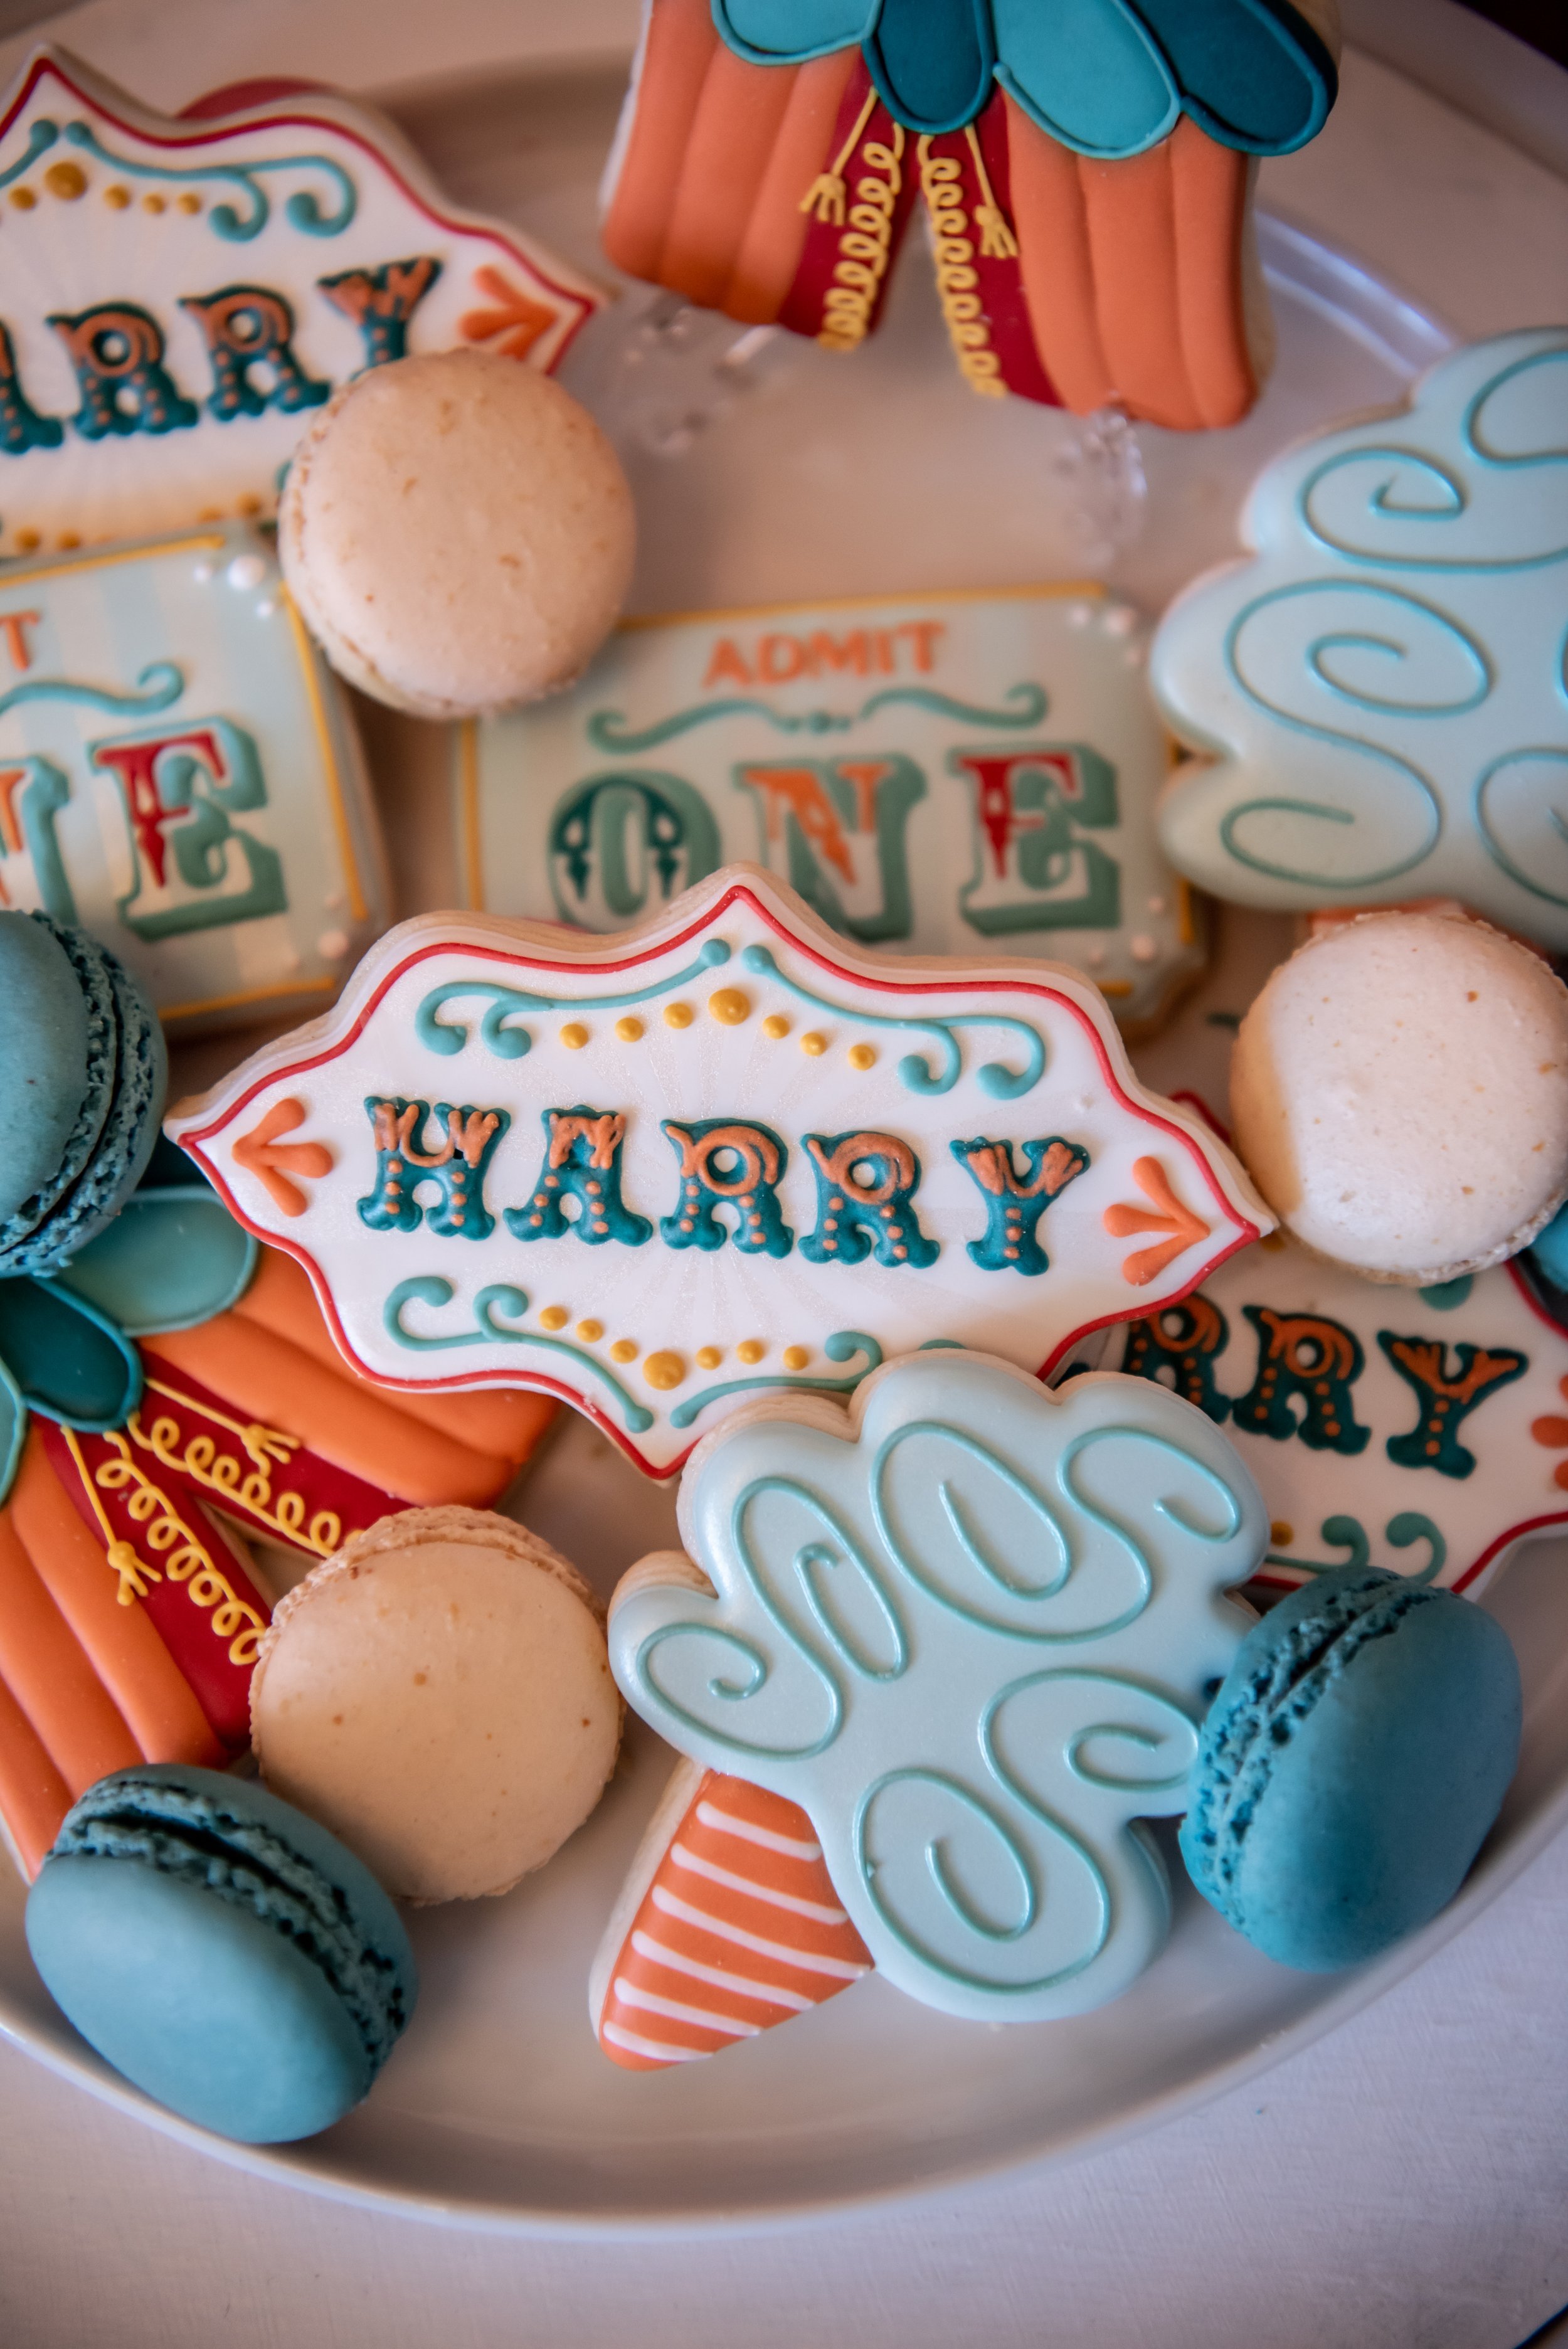 Carnival or circus themed birthday cookies and macarons. Party details at www.minteventdesign.com!